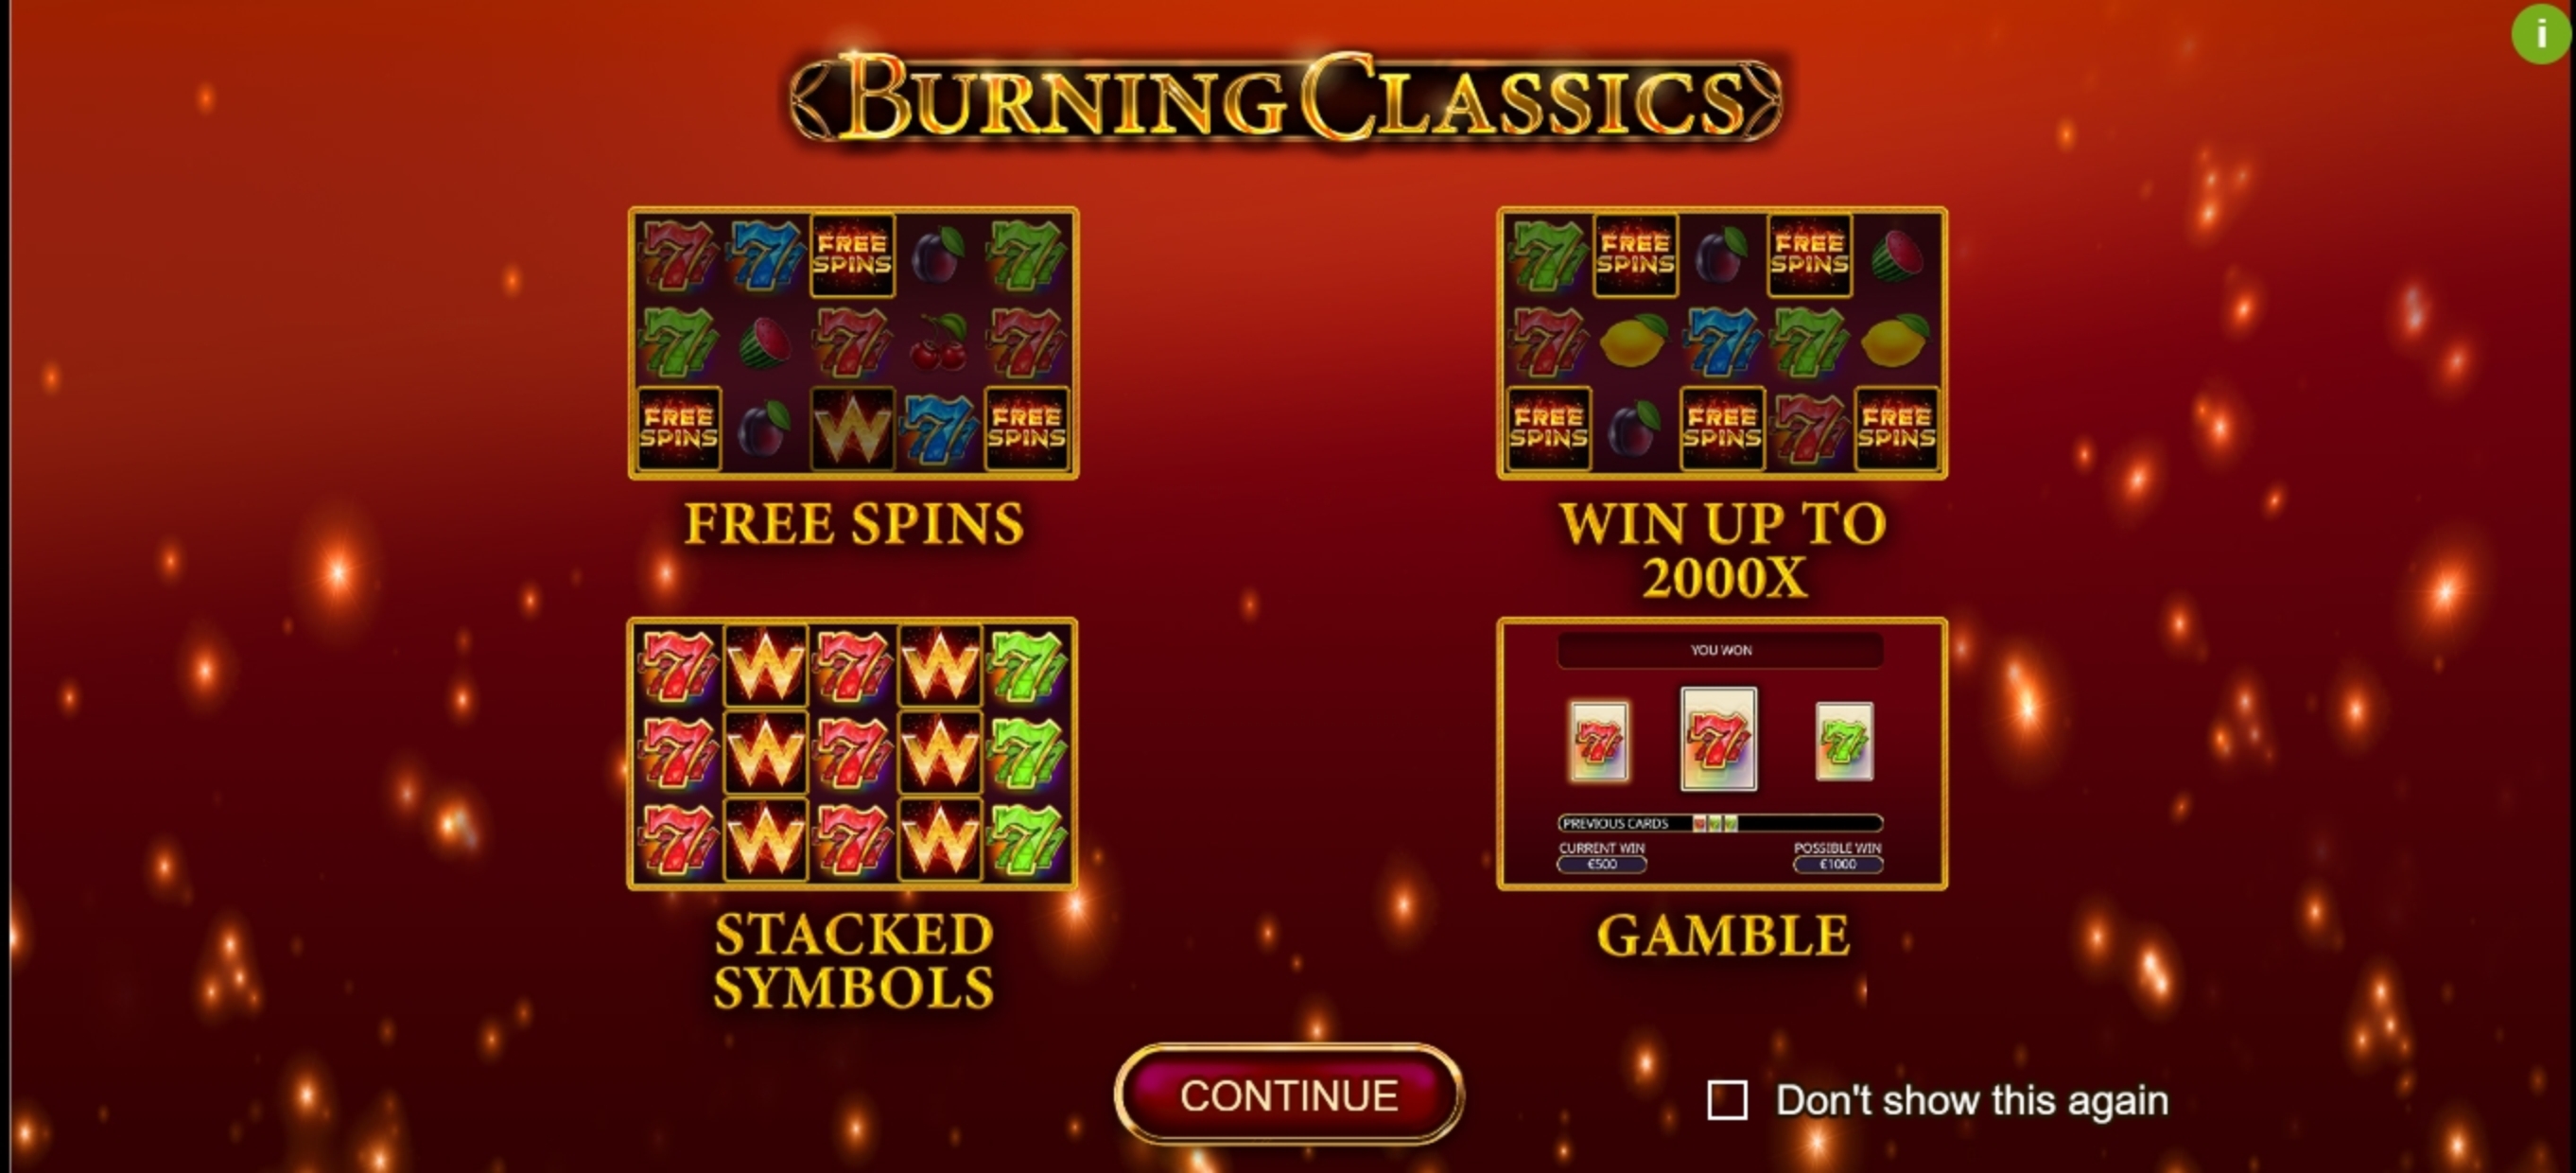 Play Burning Classics Free Casino Slot Game by Booming Games